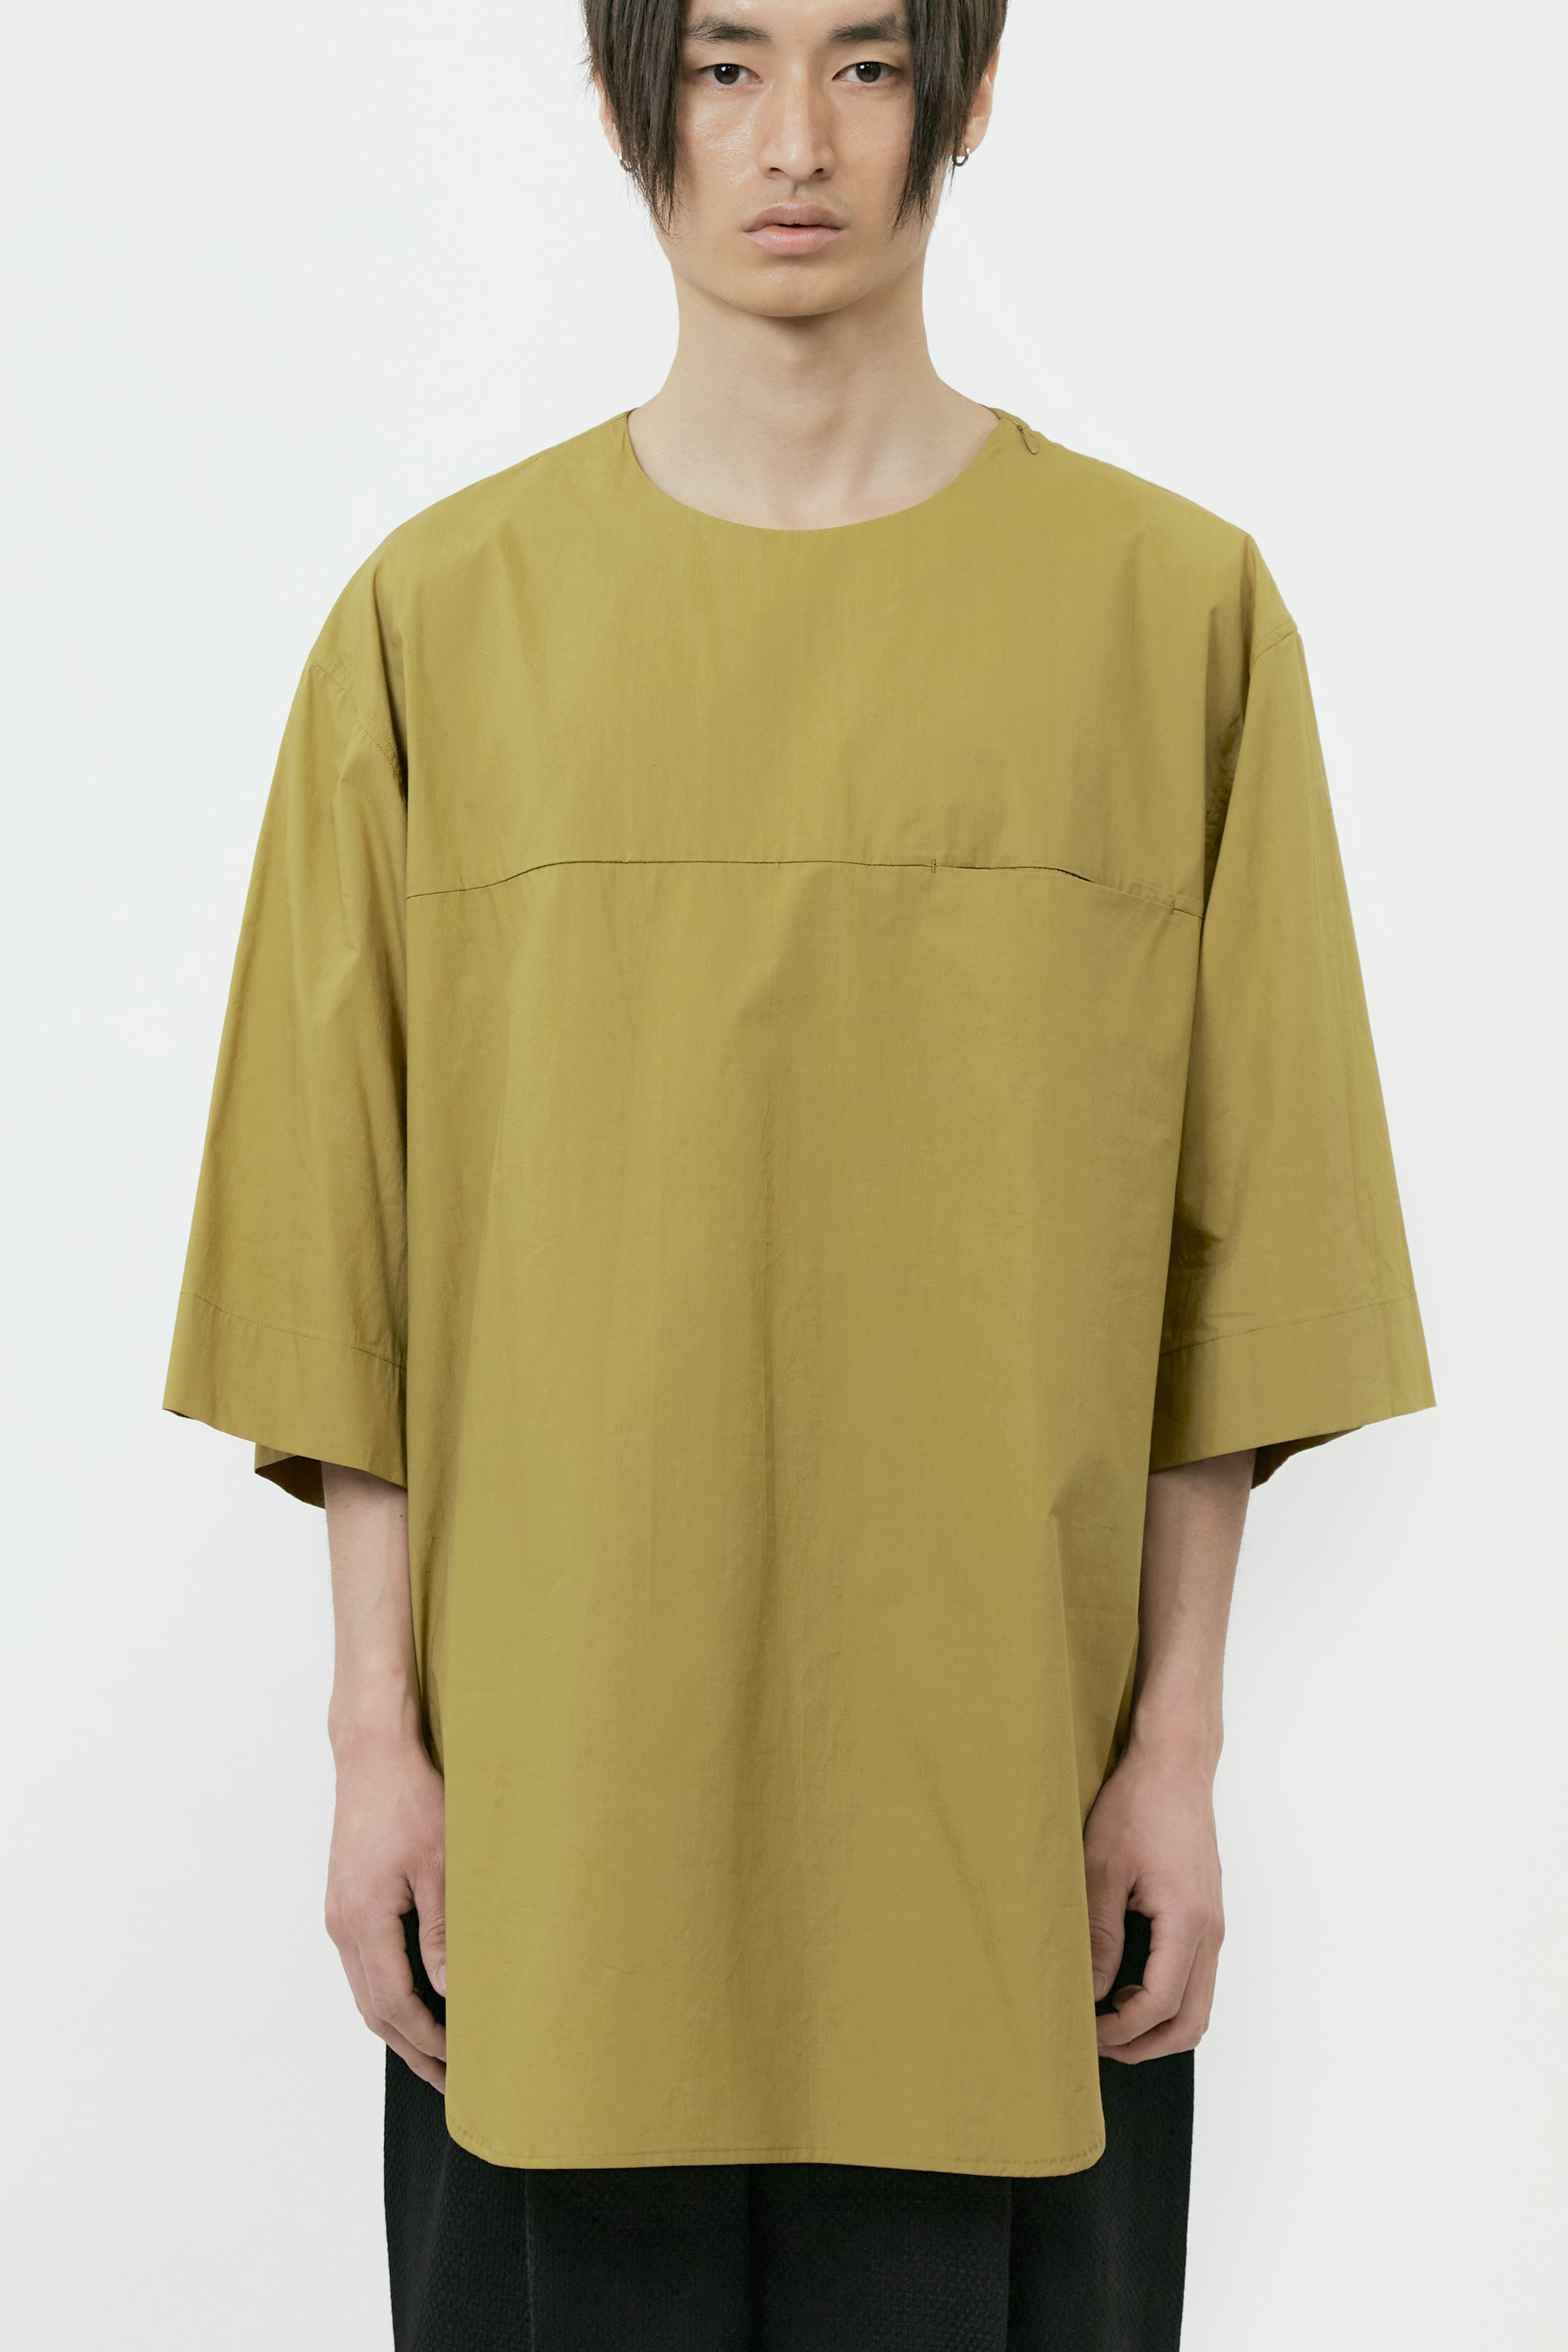 OLIVE HALF SLEEVE PULLOVER SHIRTS